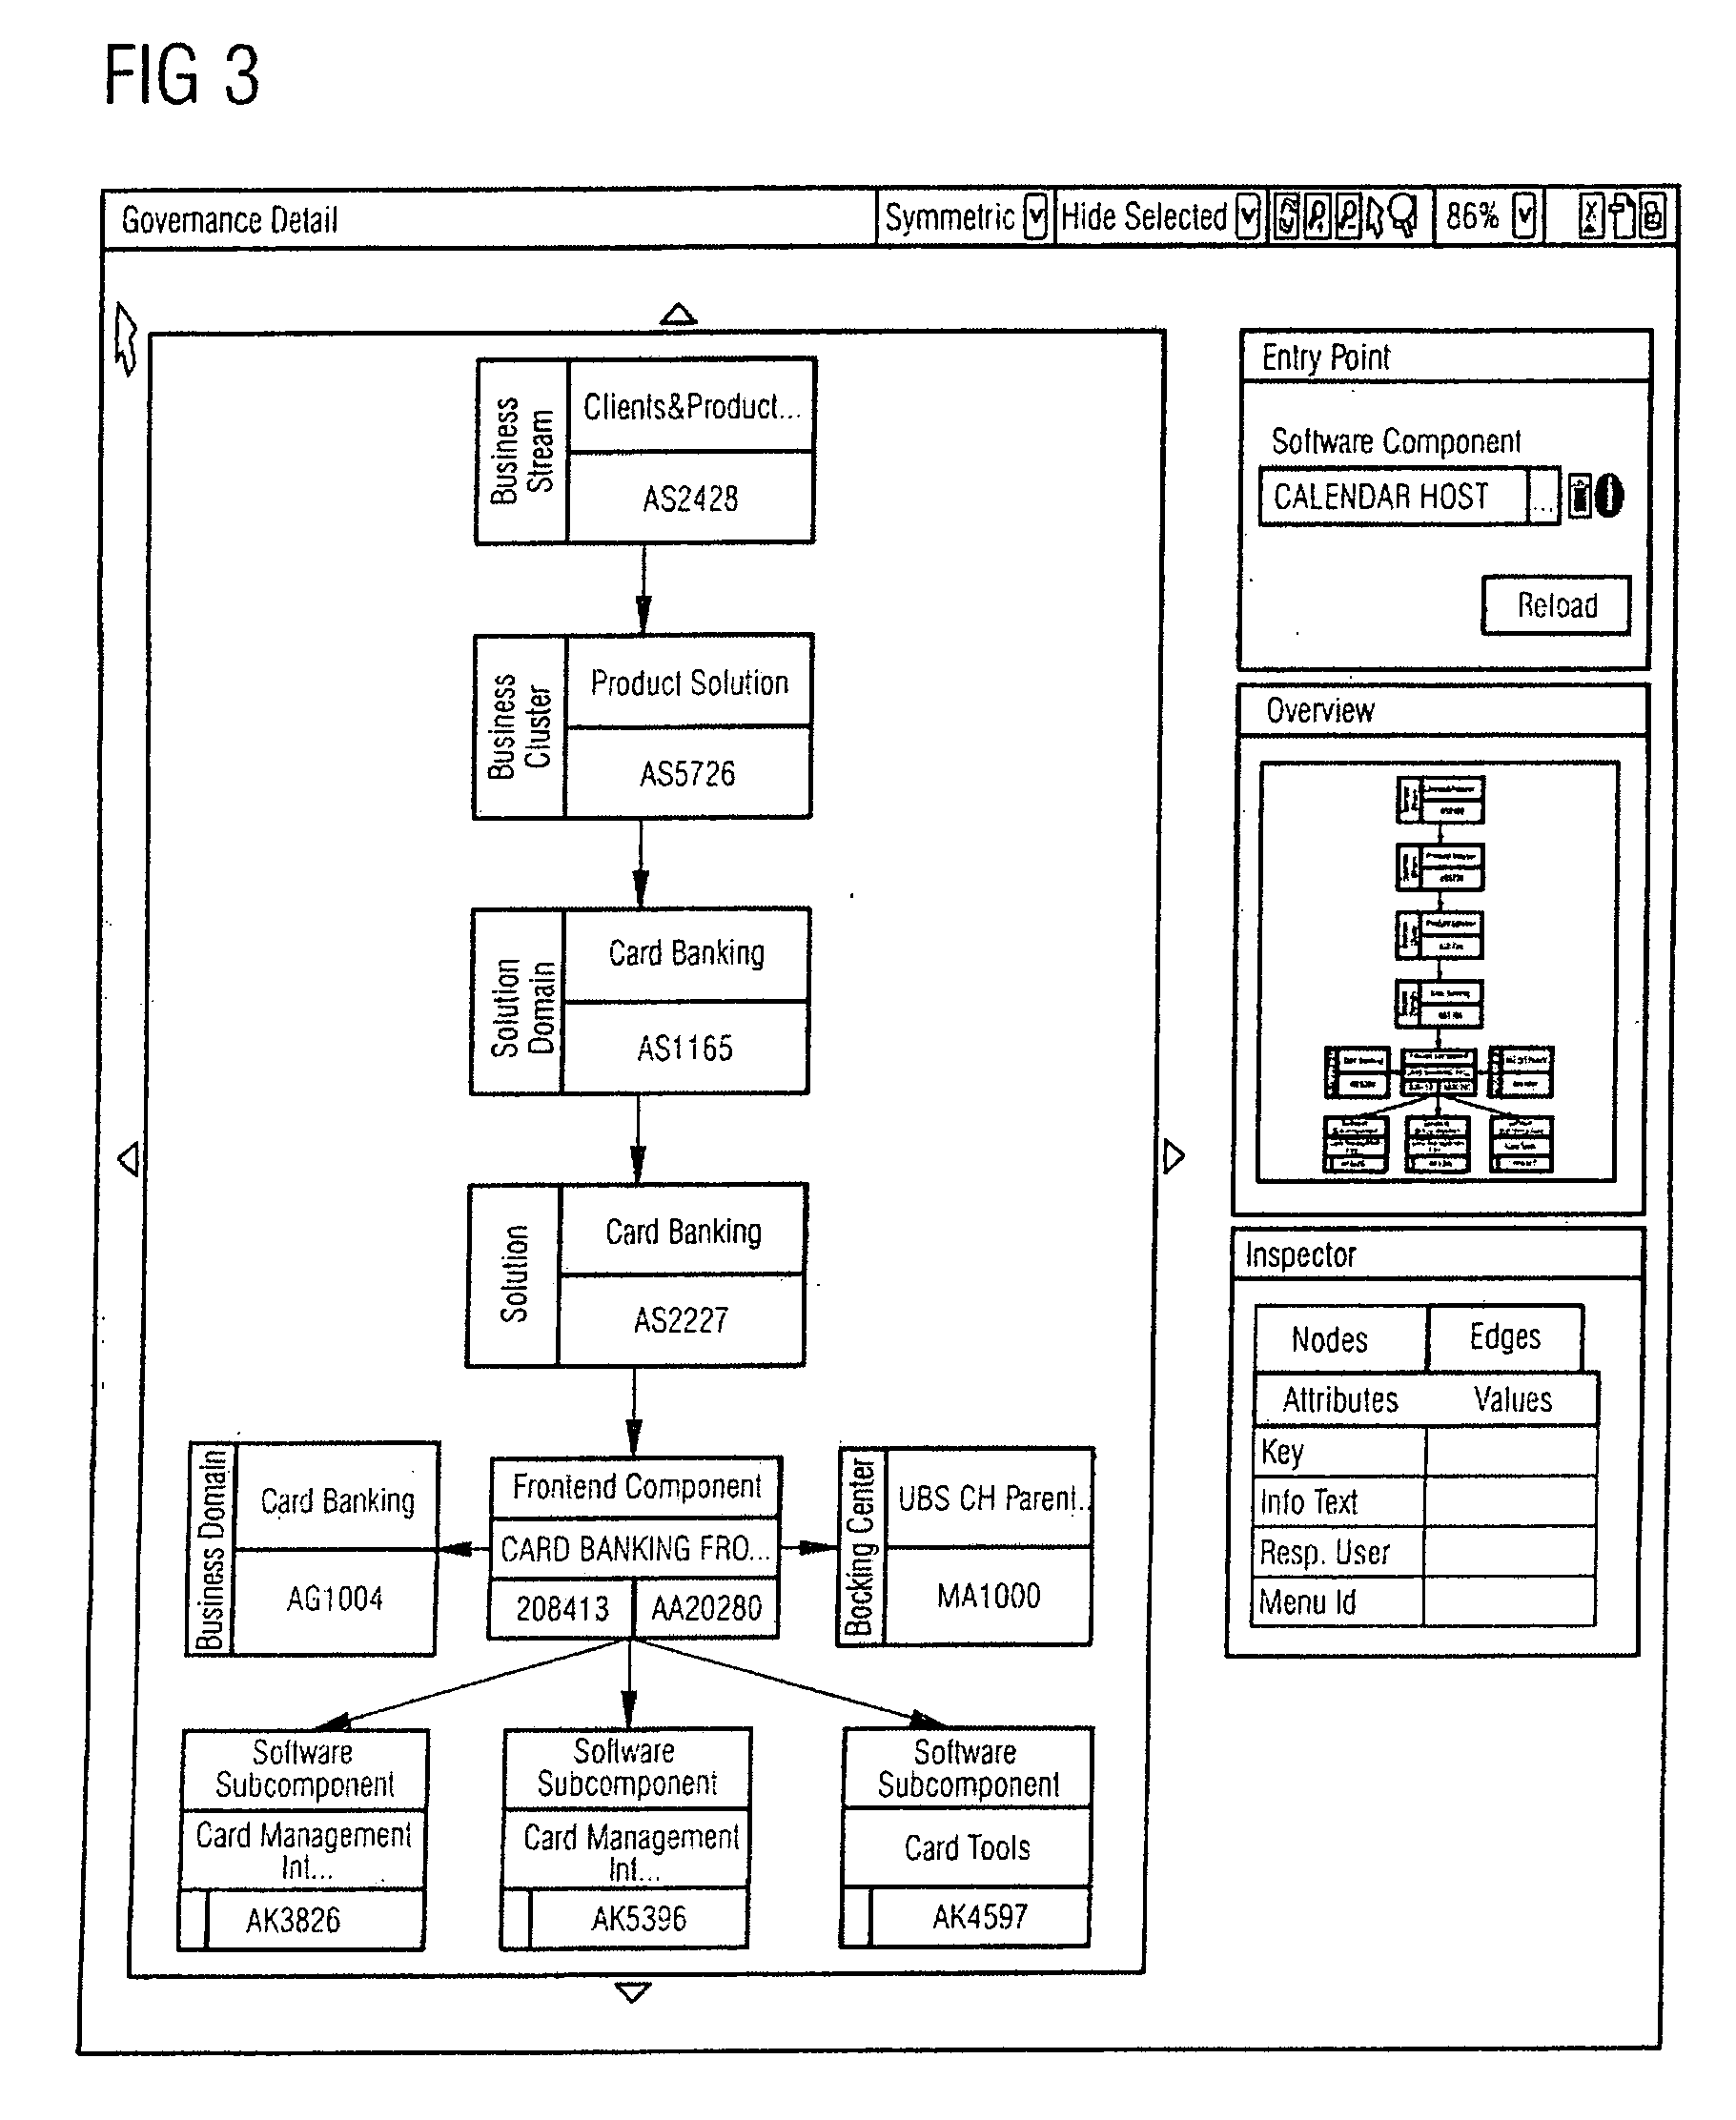 Computer-implemented system for analysis, administration, control, management and monitoring of a complex hardware/software architecture